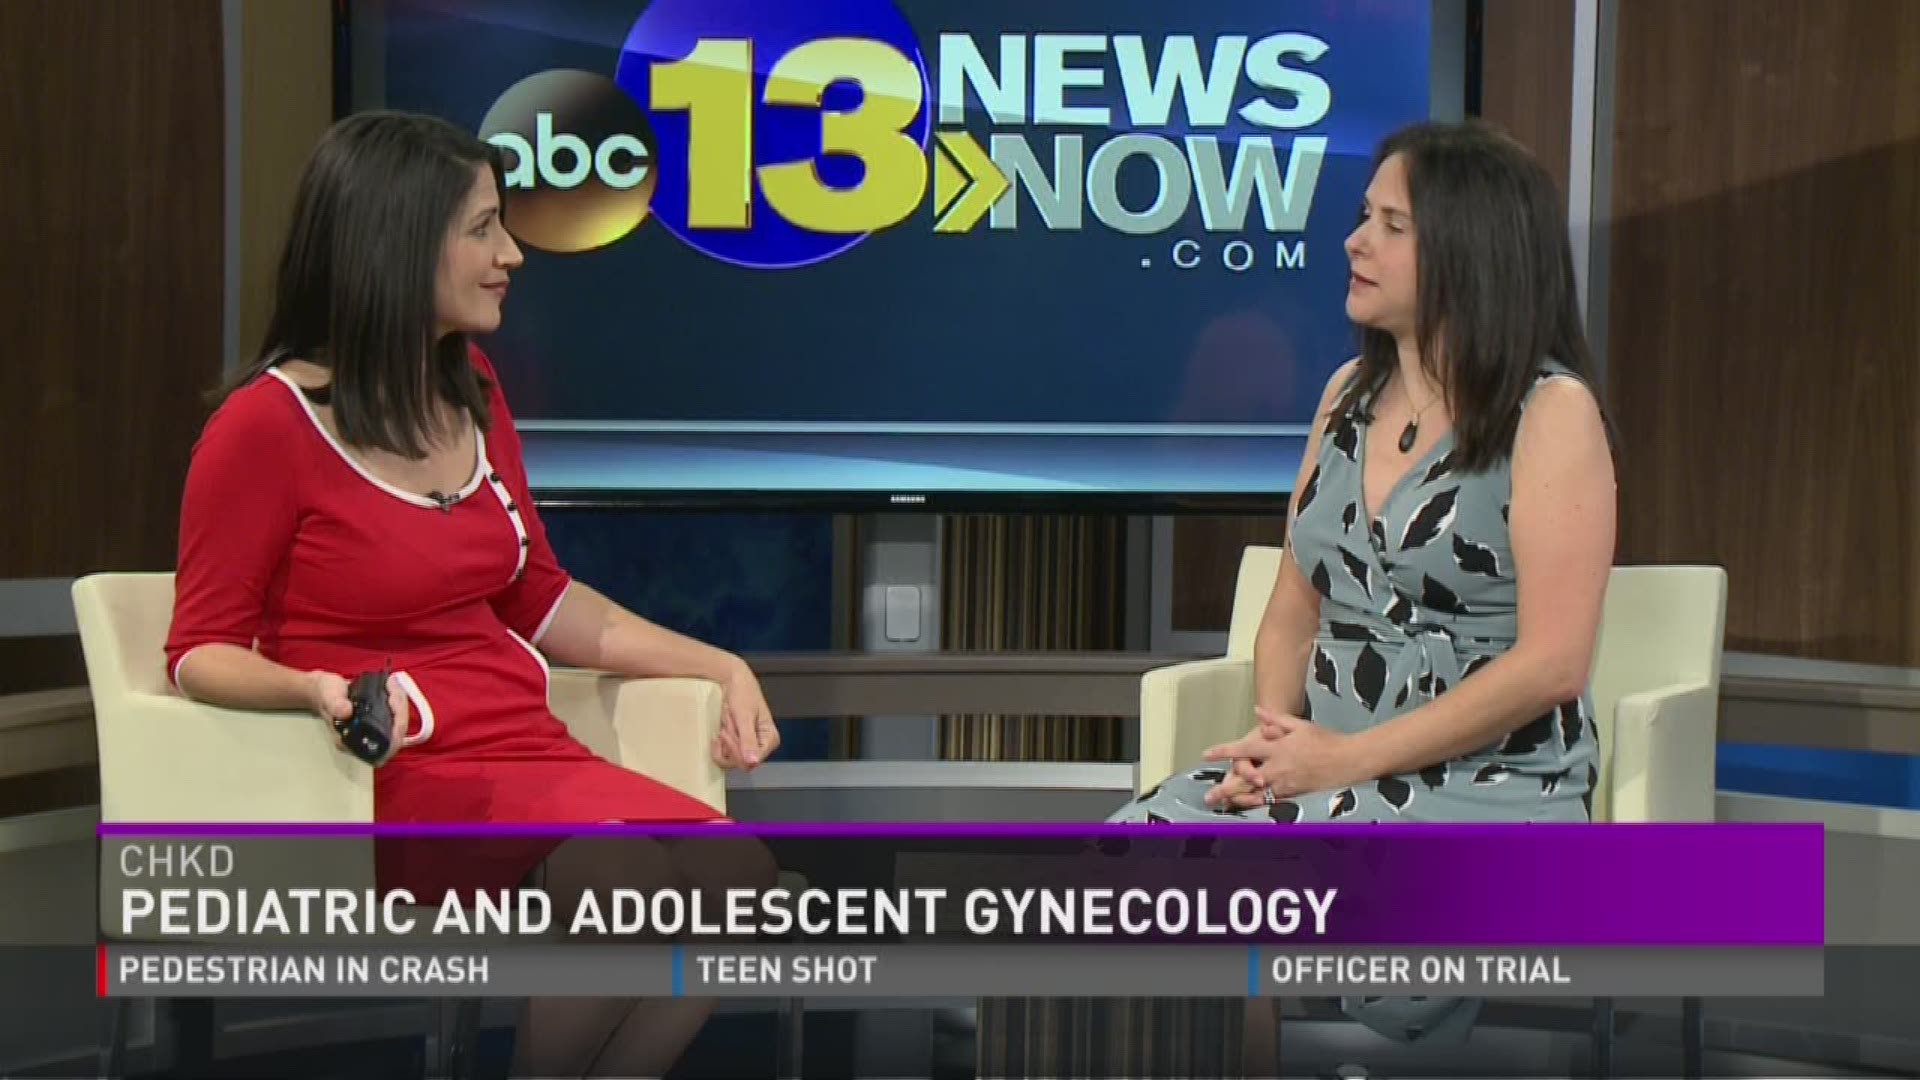 Pediatric and Adolescent Gynecology at CHKD.